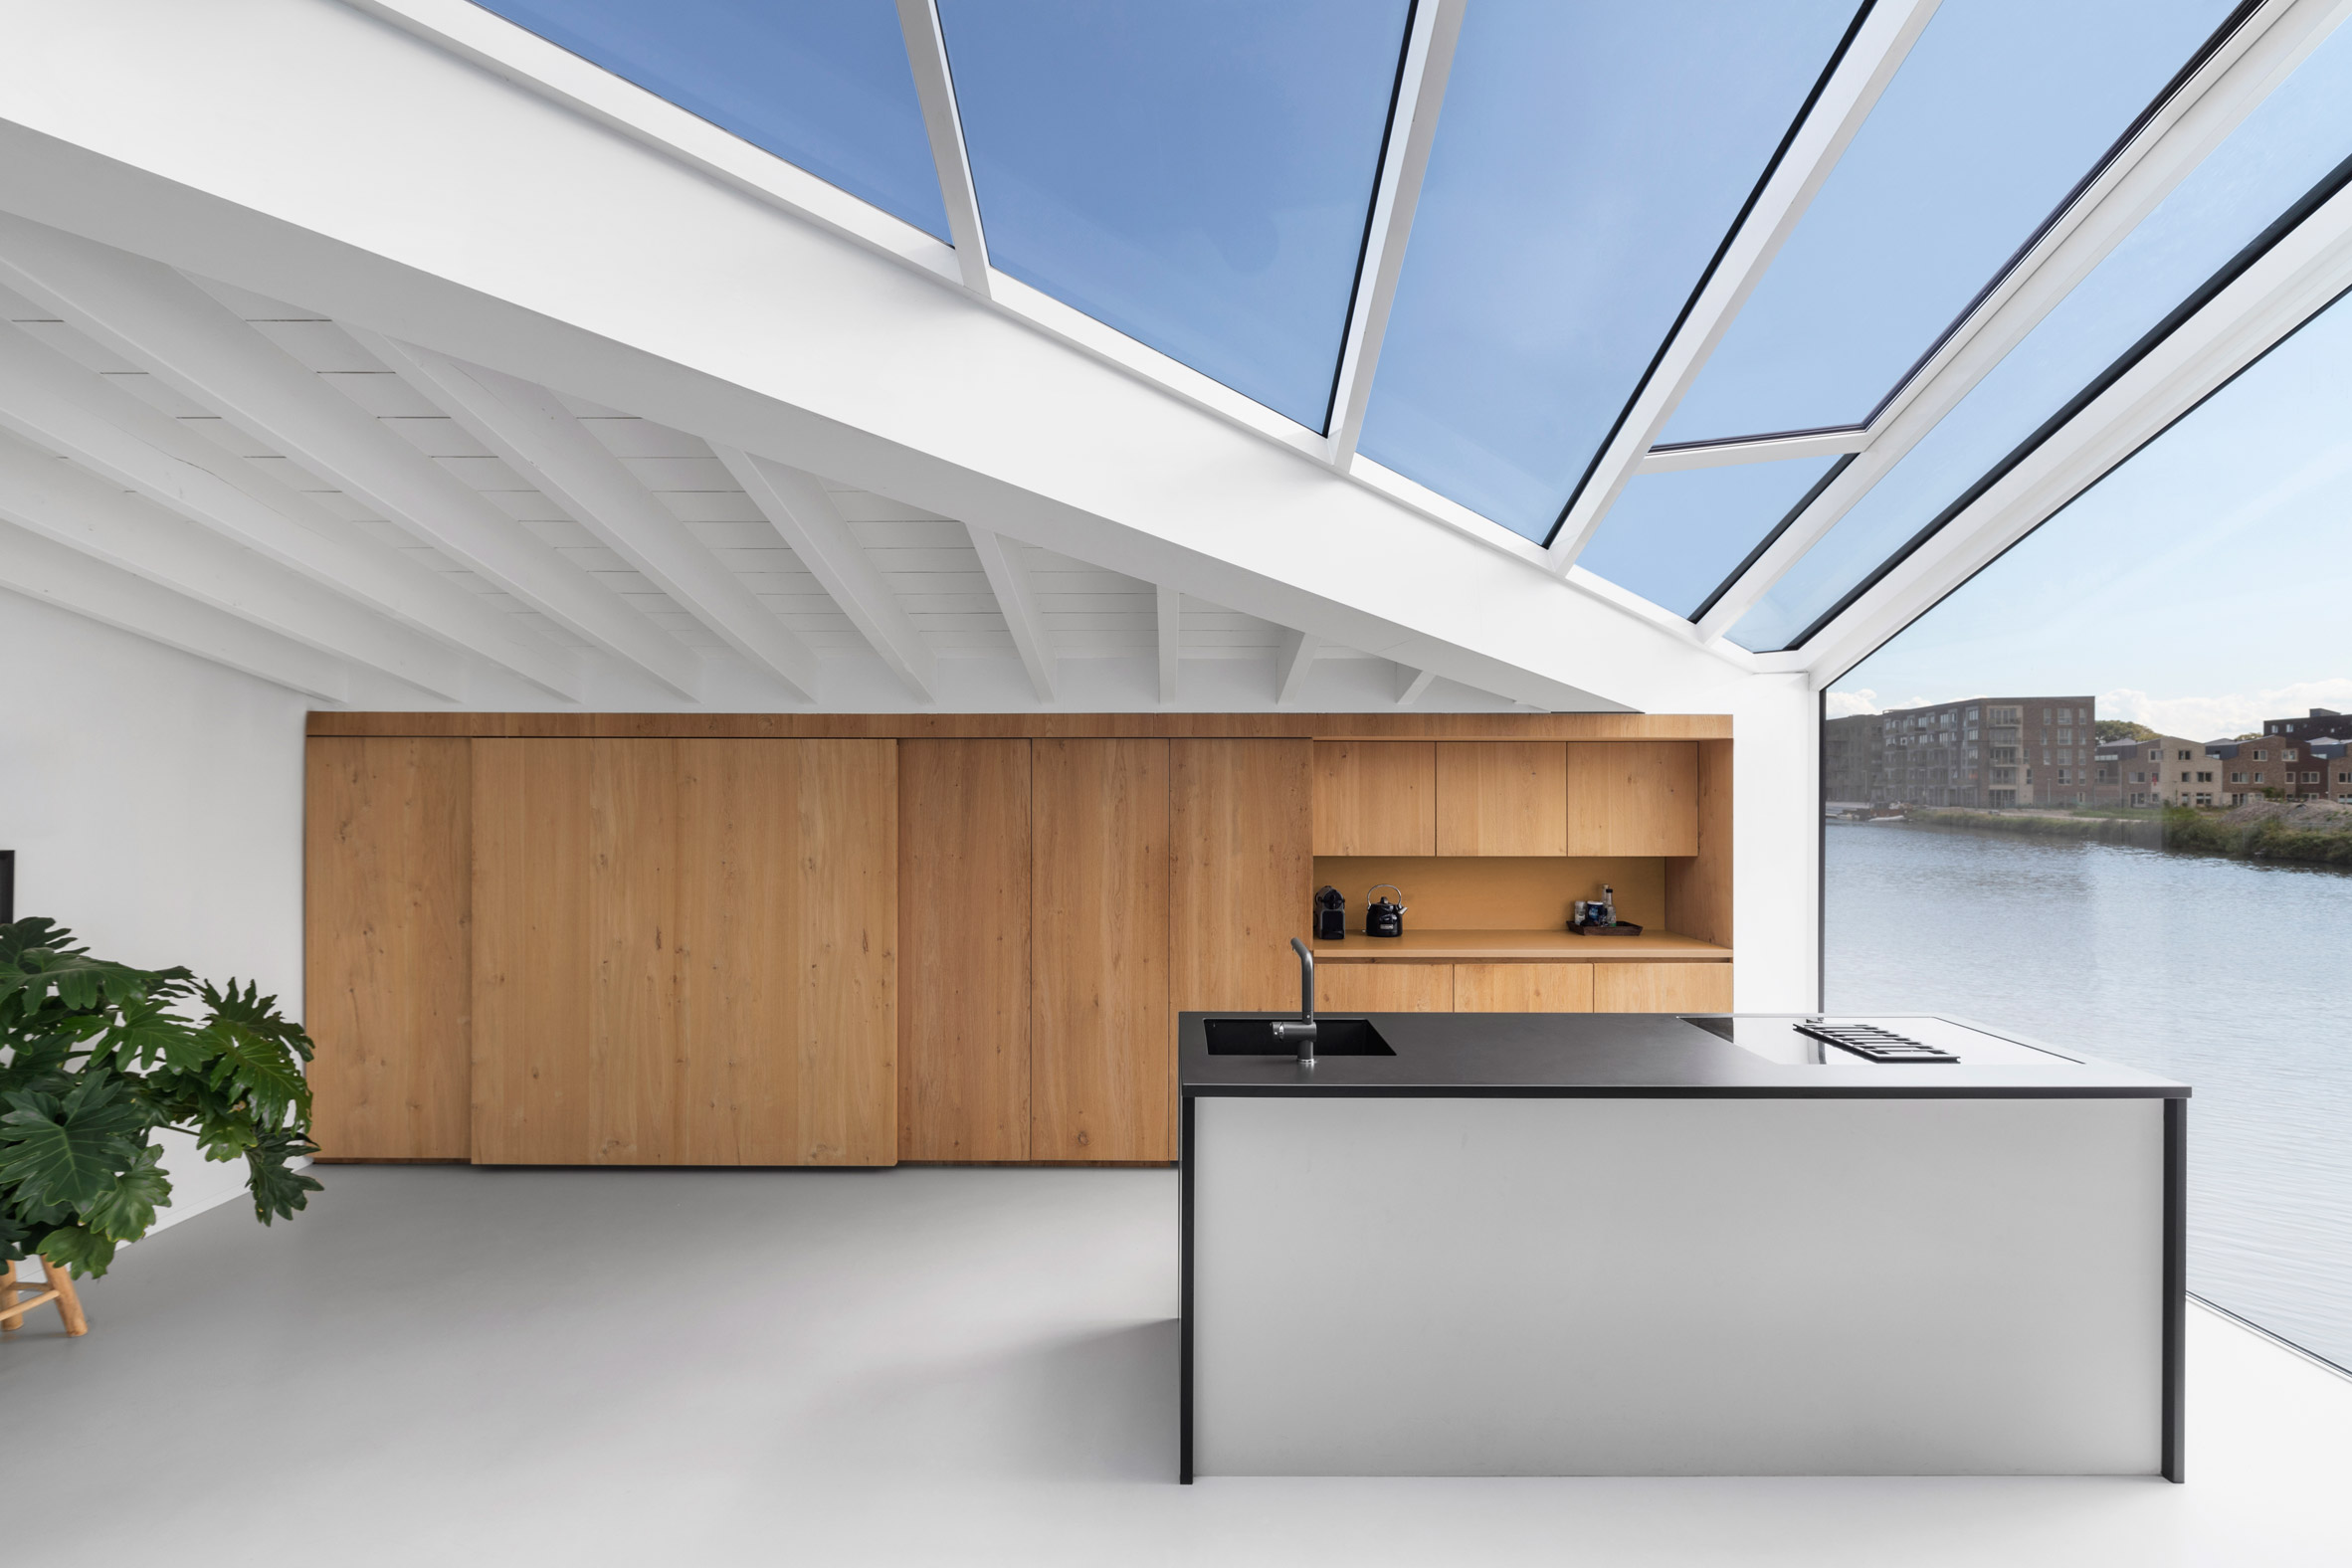 The kitchen inside the floating house by i29